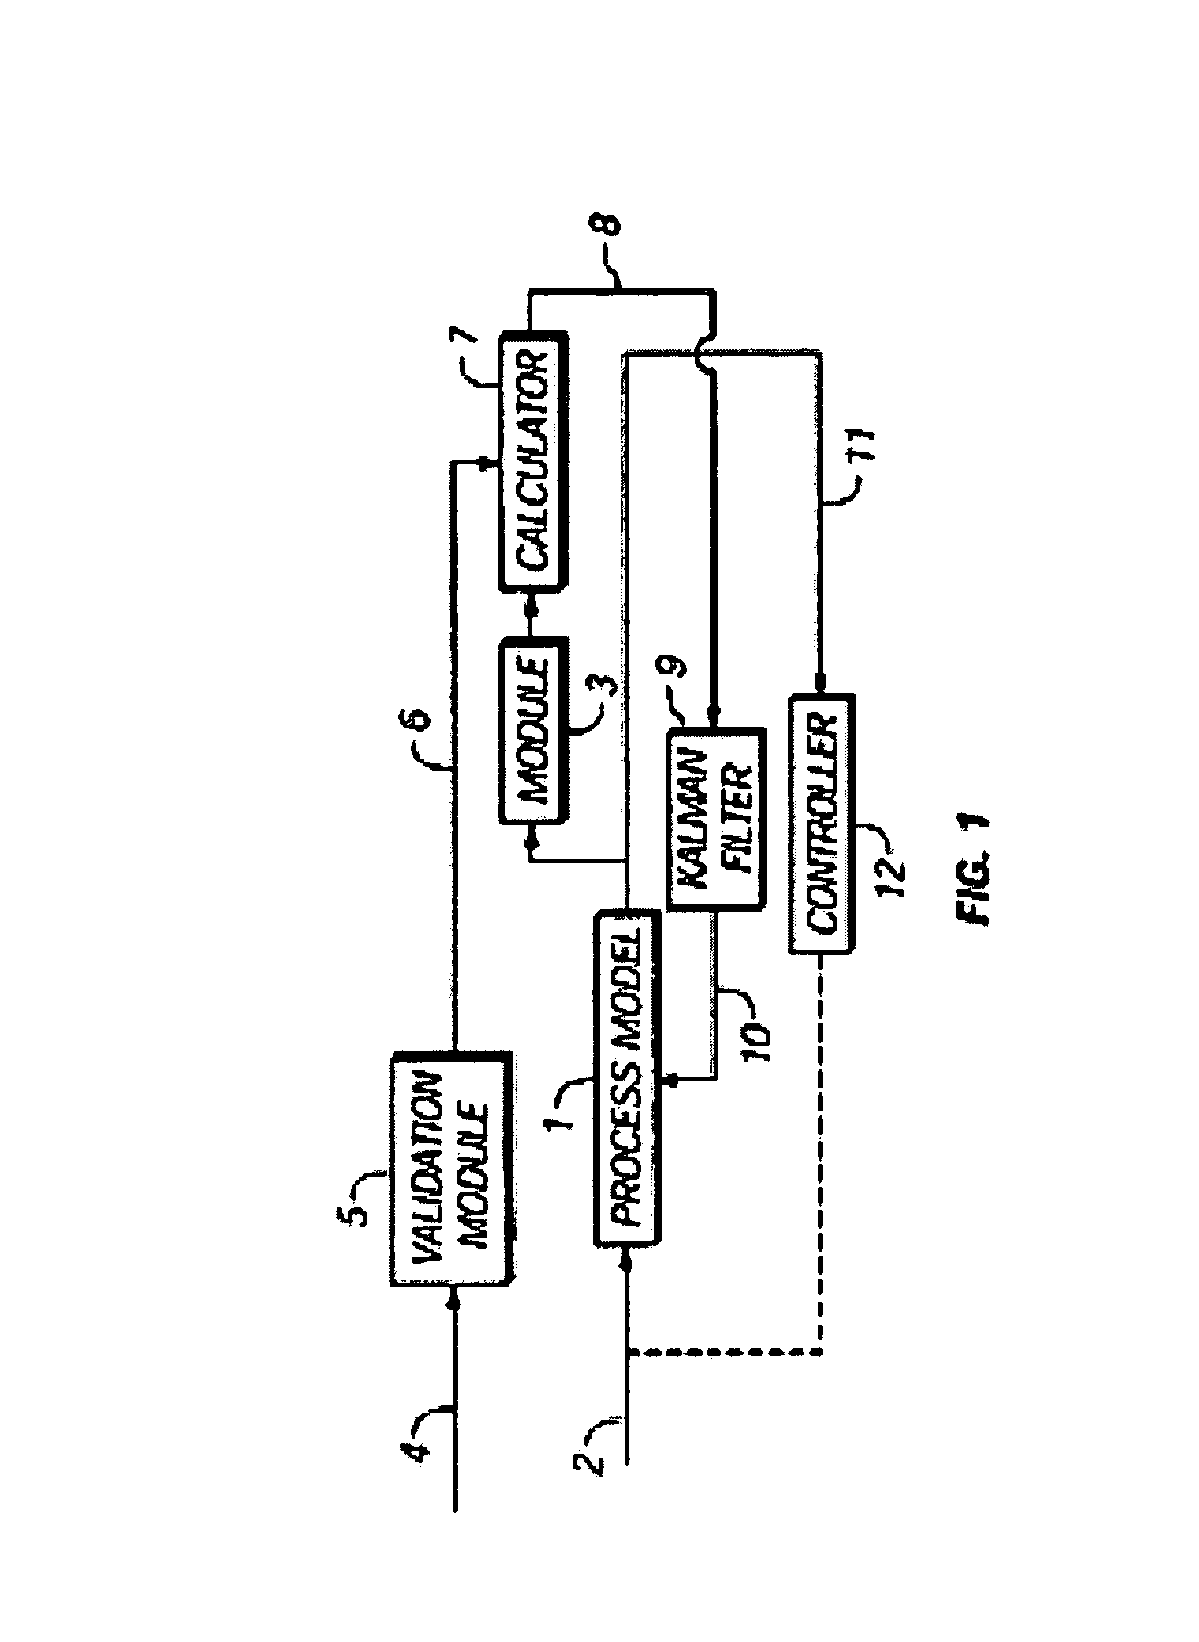 Method for automatic on-line calibration of a process model